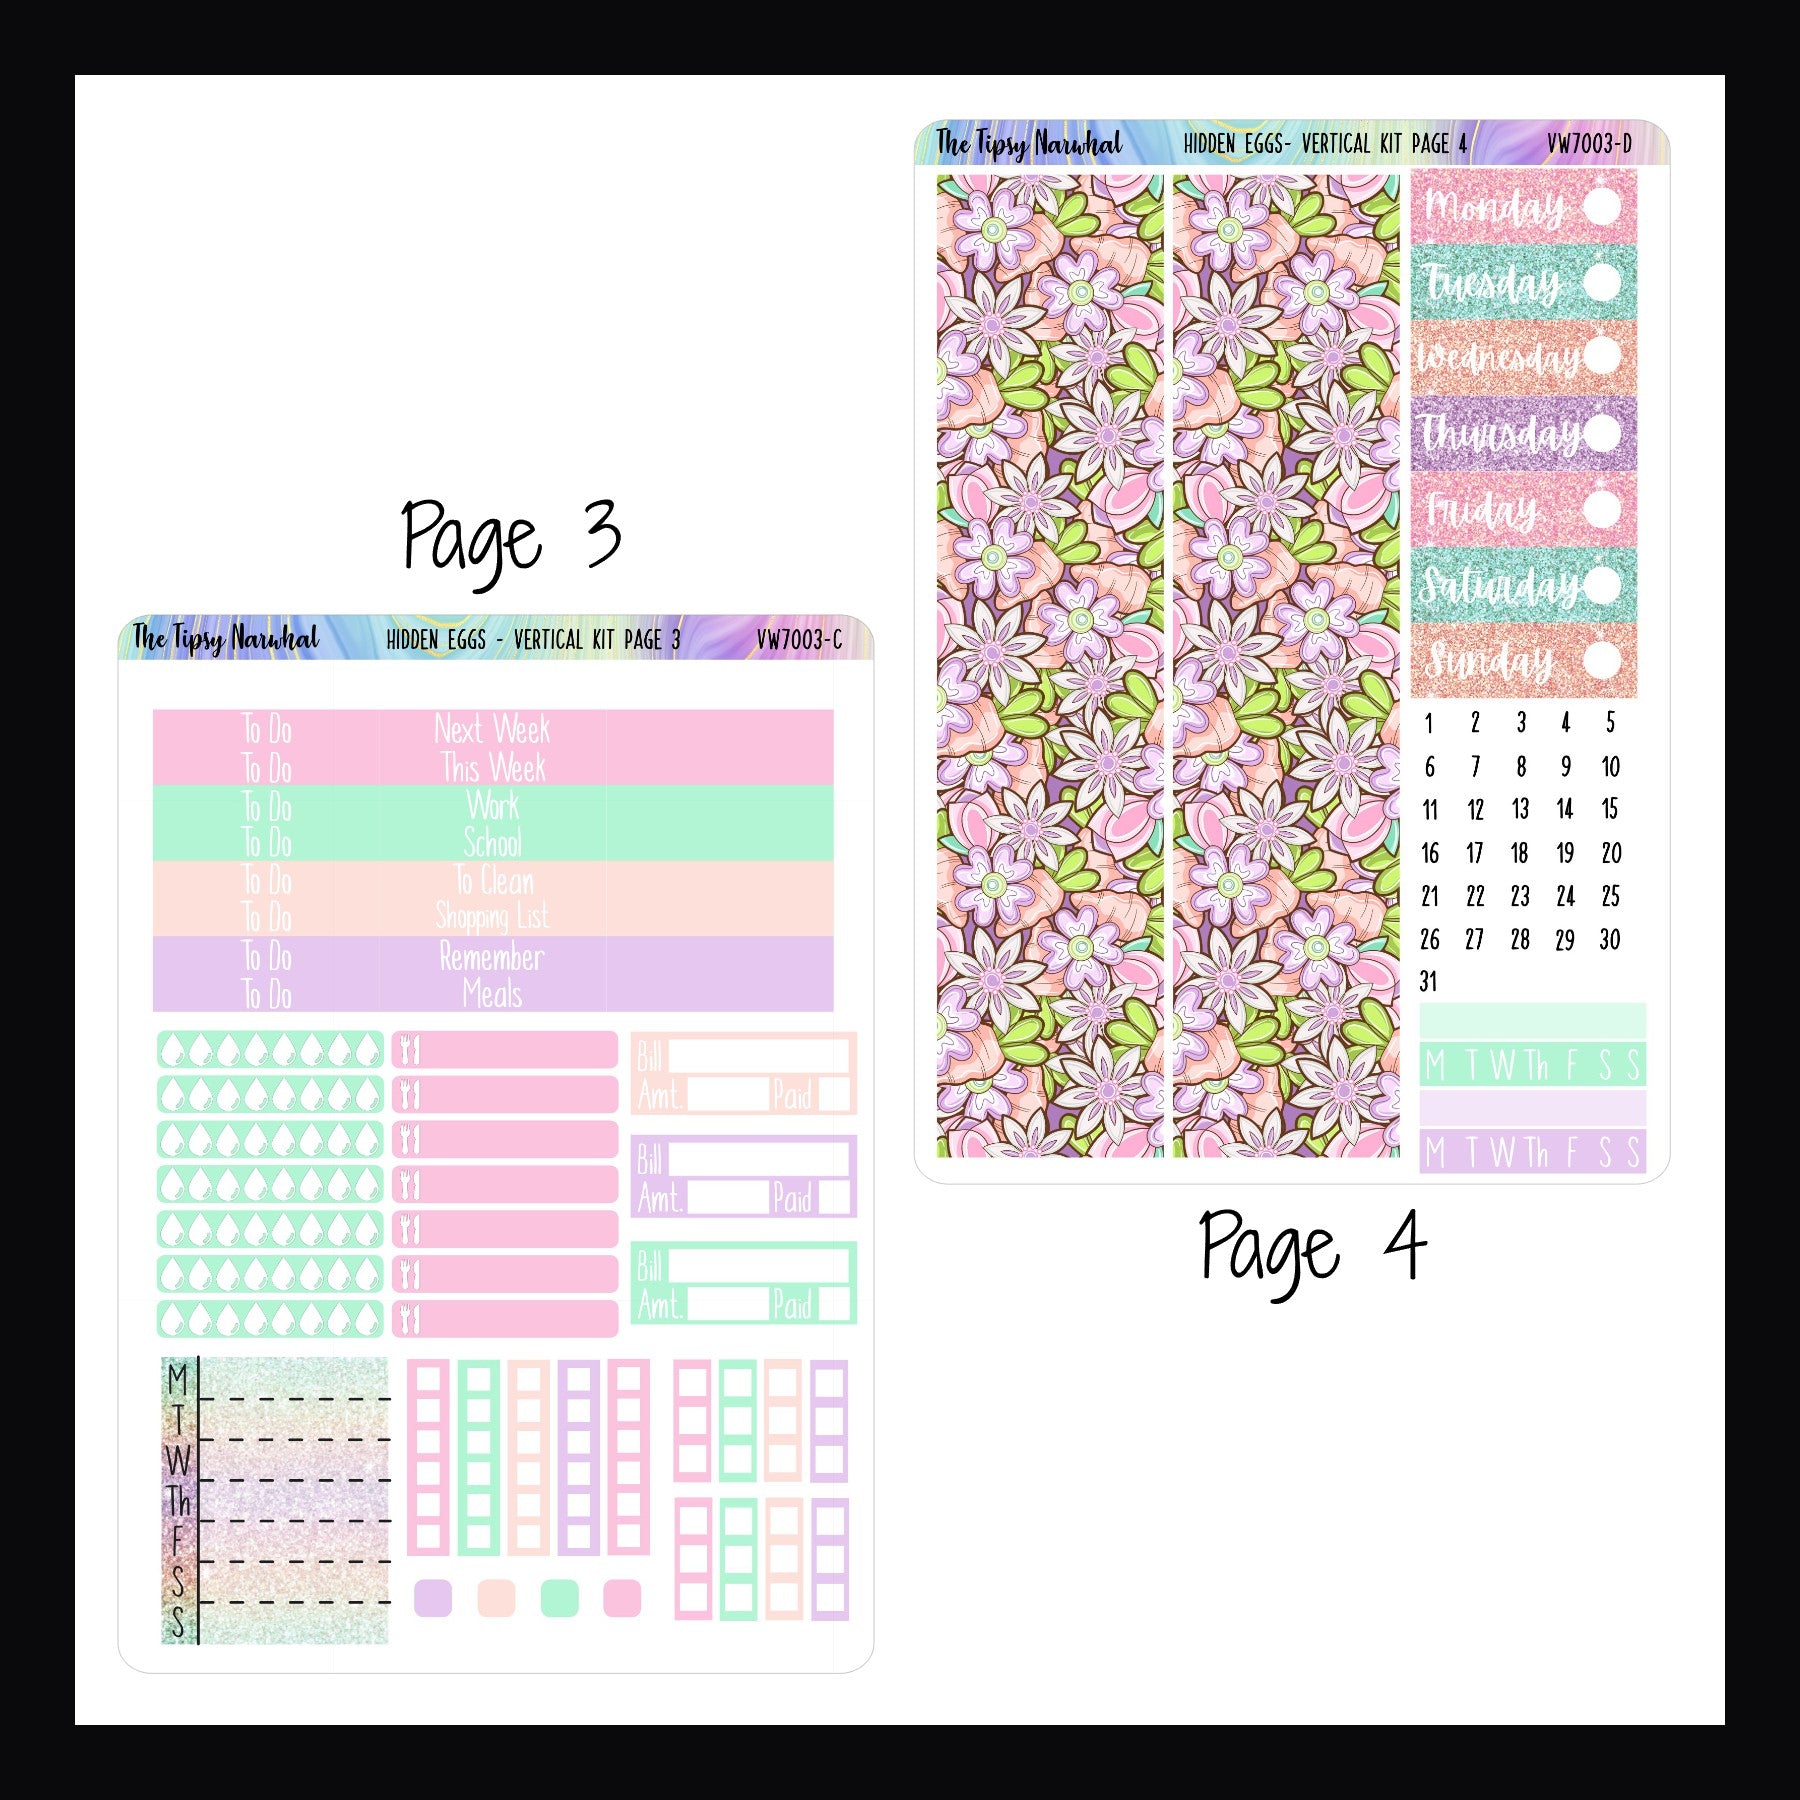 Hidden Eggs Vertical Kit Pages 3 and 4.  Page 3 features headers, checklists, a weekly sticker, hydration trackers, meal trackers and bill tracking stickers.  Page 4 features 2 large washi strips, date covers and habit tracking stickers.